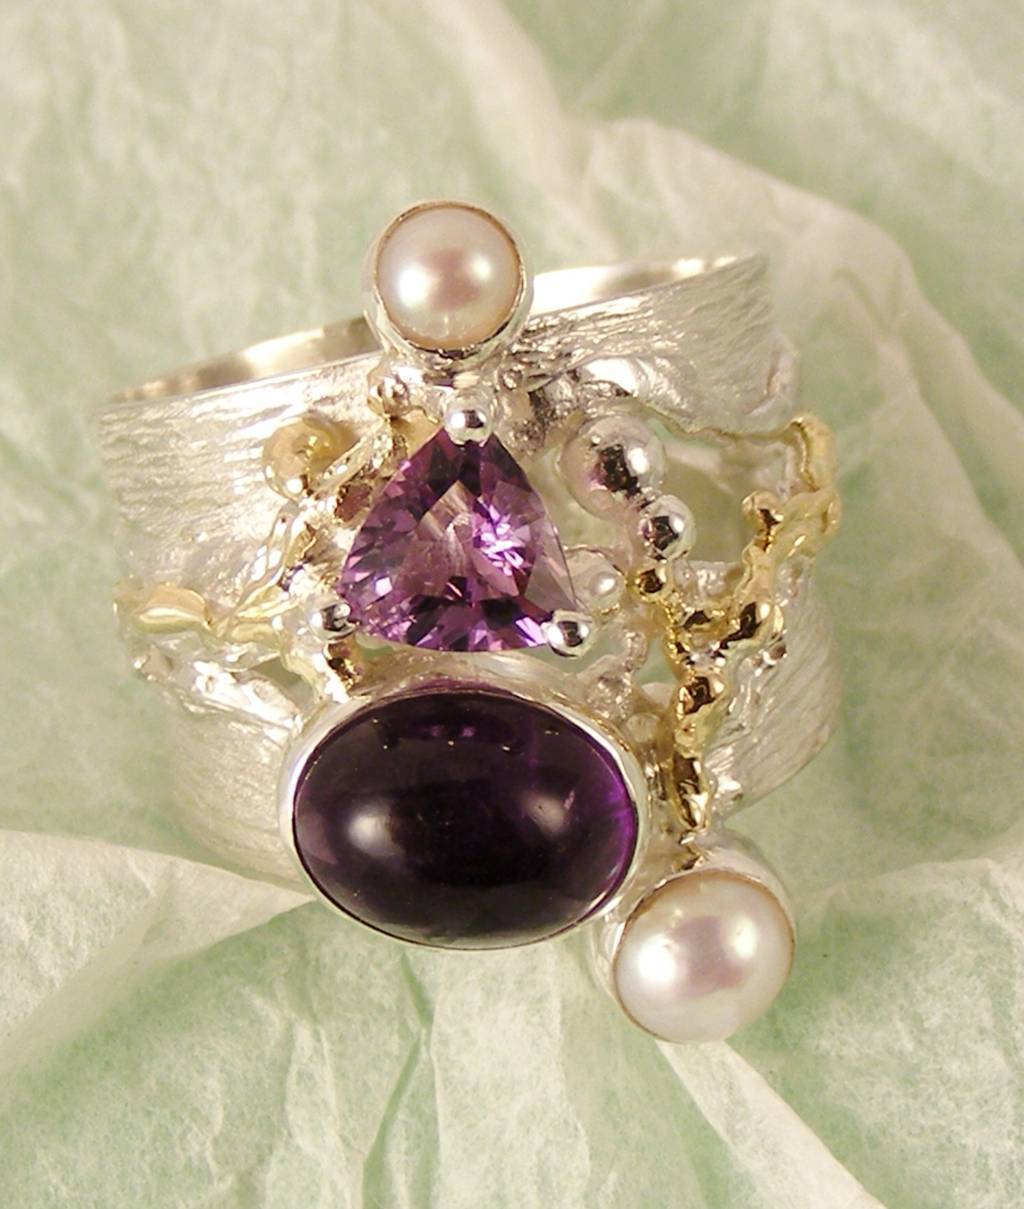 jewellery with seaside theme, jewellery with seashells theme, jewellery with nature theme, jewllery with ocean theme, jewelry made by artist, rings for women with amethysts and pearls, gregory pyra piro handcrafted ring 53821